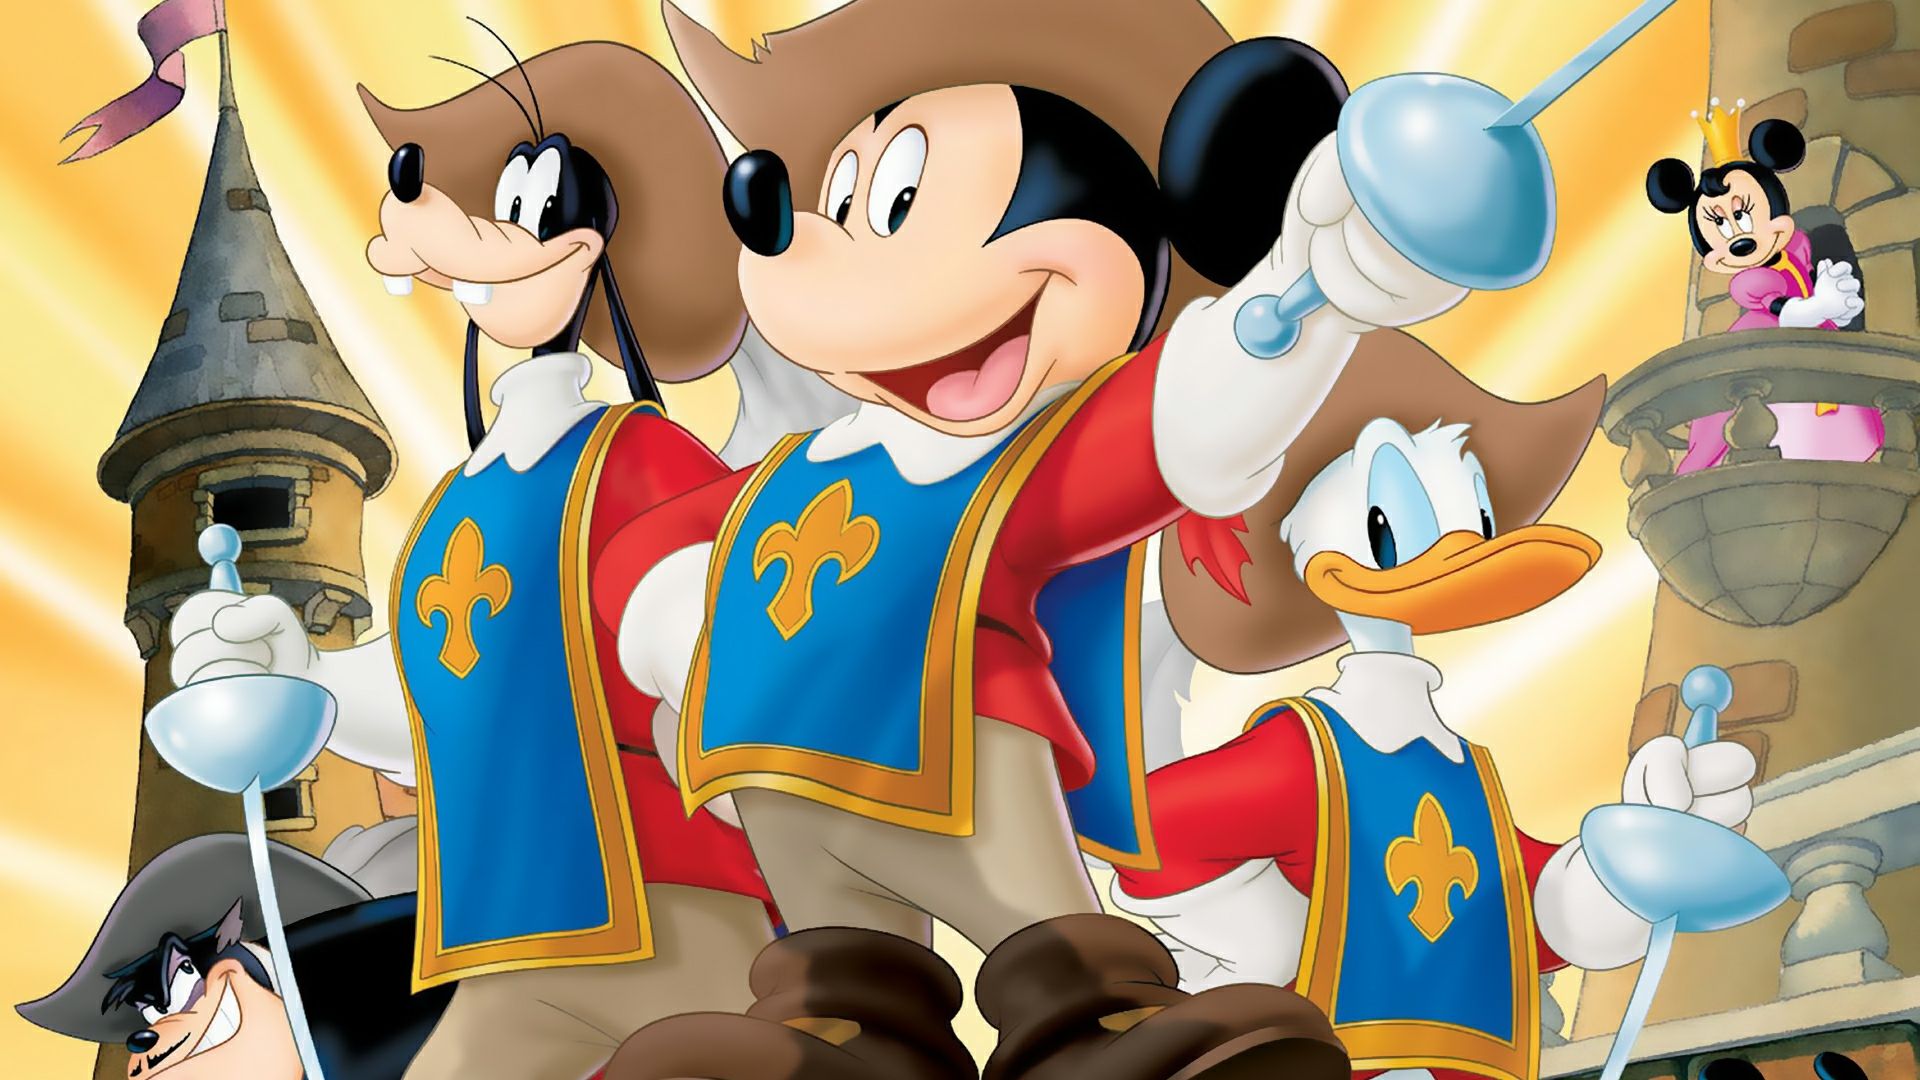 Mickey Donald Goofy The Three Musketeers Wallpaper